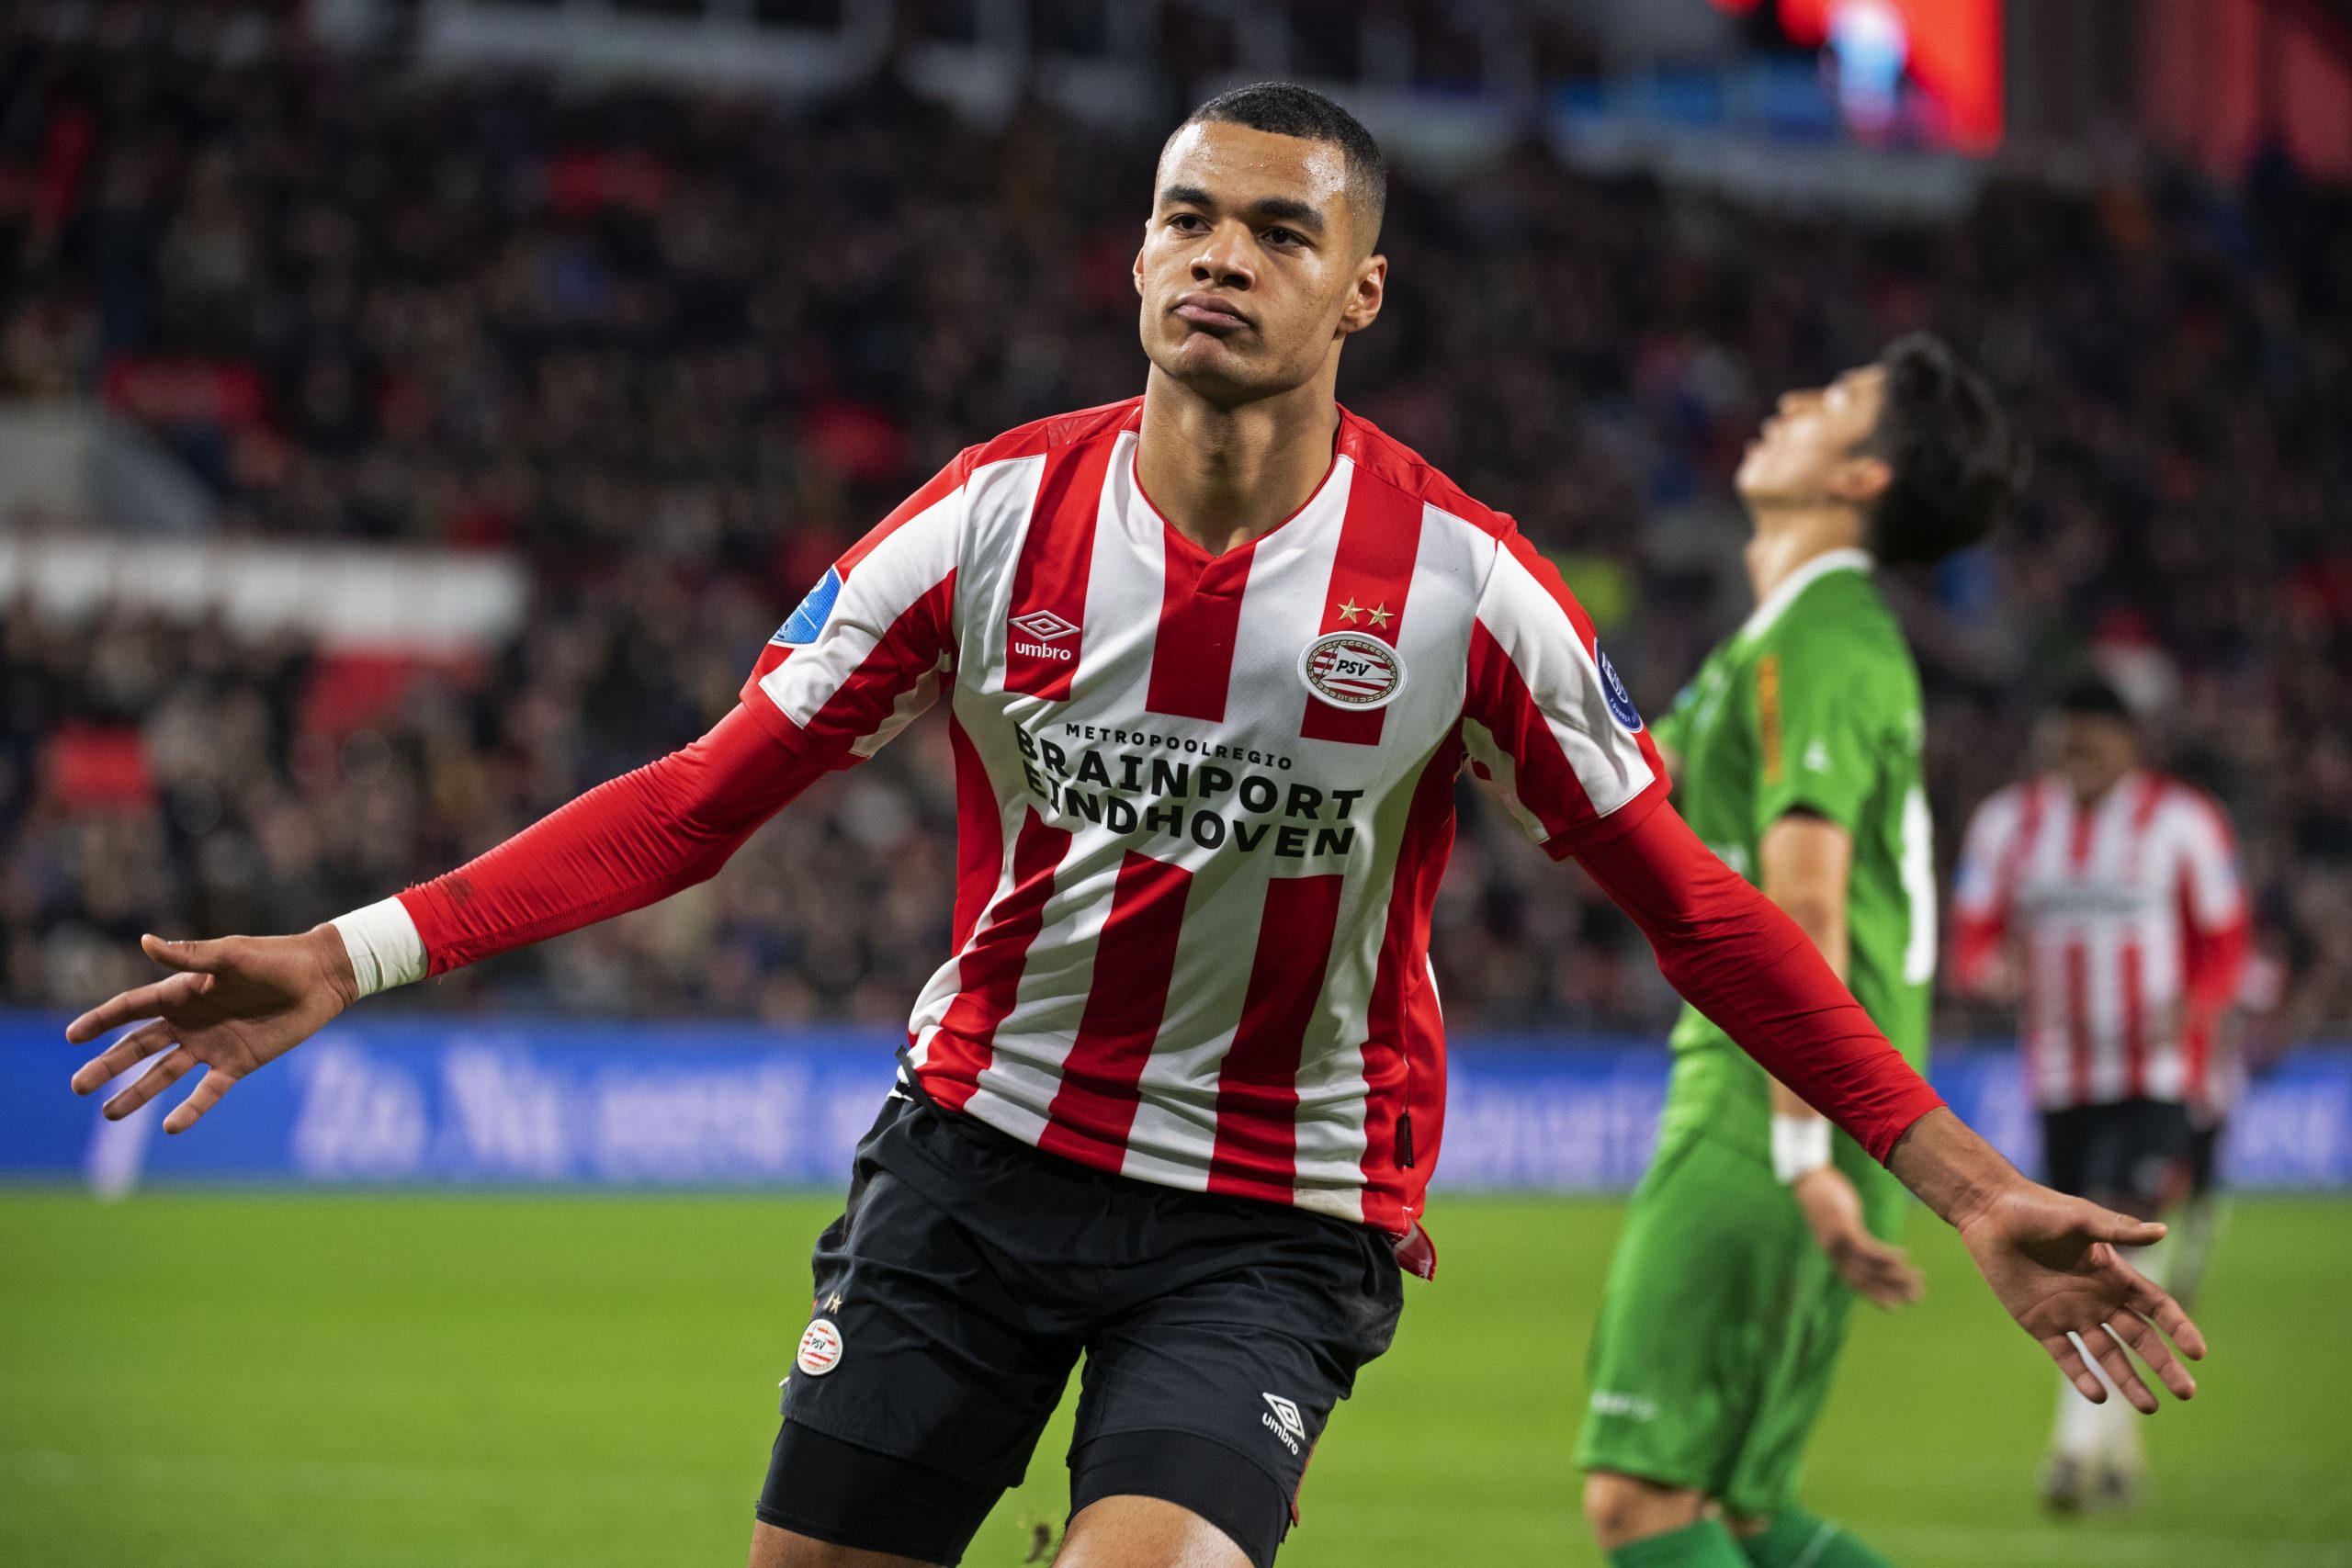 PSV Eindhoven's Cody Gakpo celebrates after scoring a goal during the Dutch Eredivisie league football match between PSV Eindhoven and PEC Zwolle at the Philips Stadium in Eindhoven, on December 21, 2019.